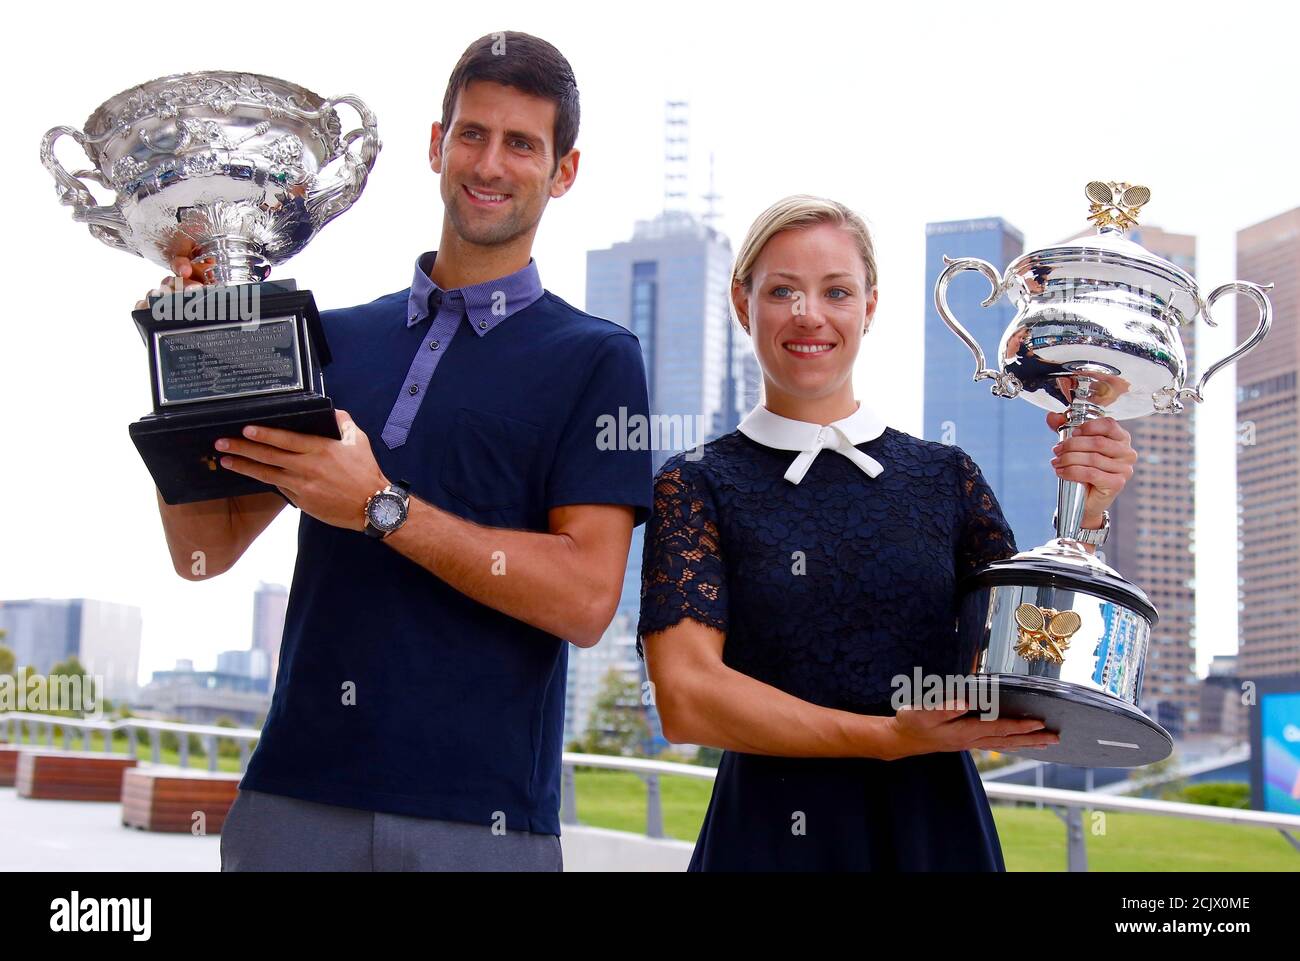 Current Australian Open tennis champions Serbia's Novak Djokovic and  Germany's Angelique Kerber stand together as they